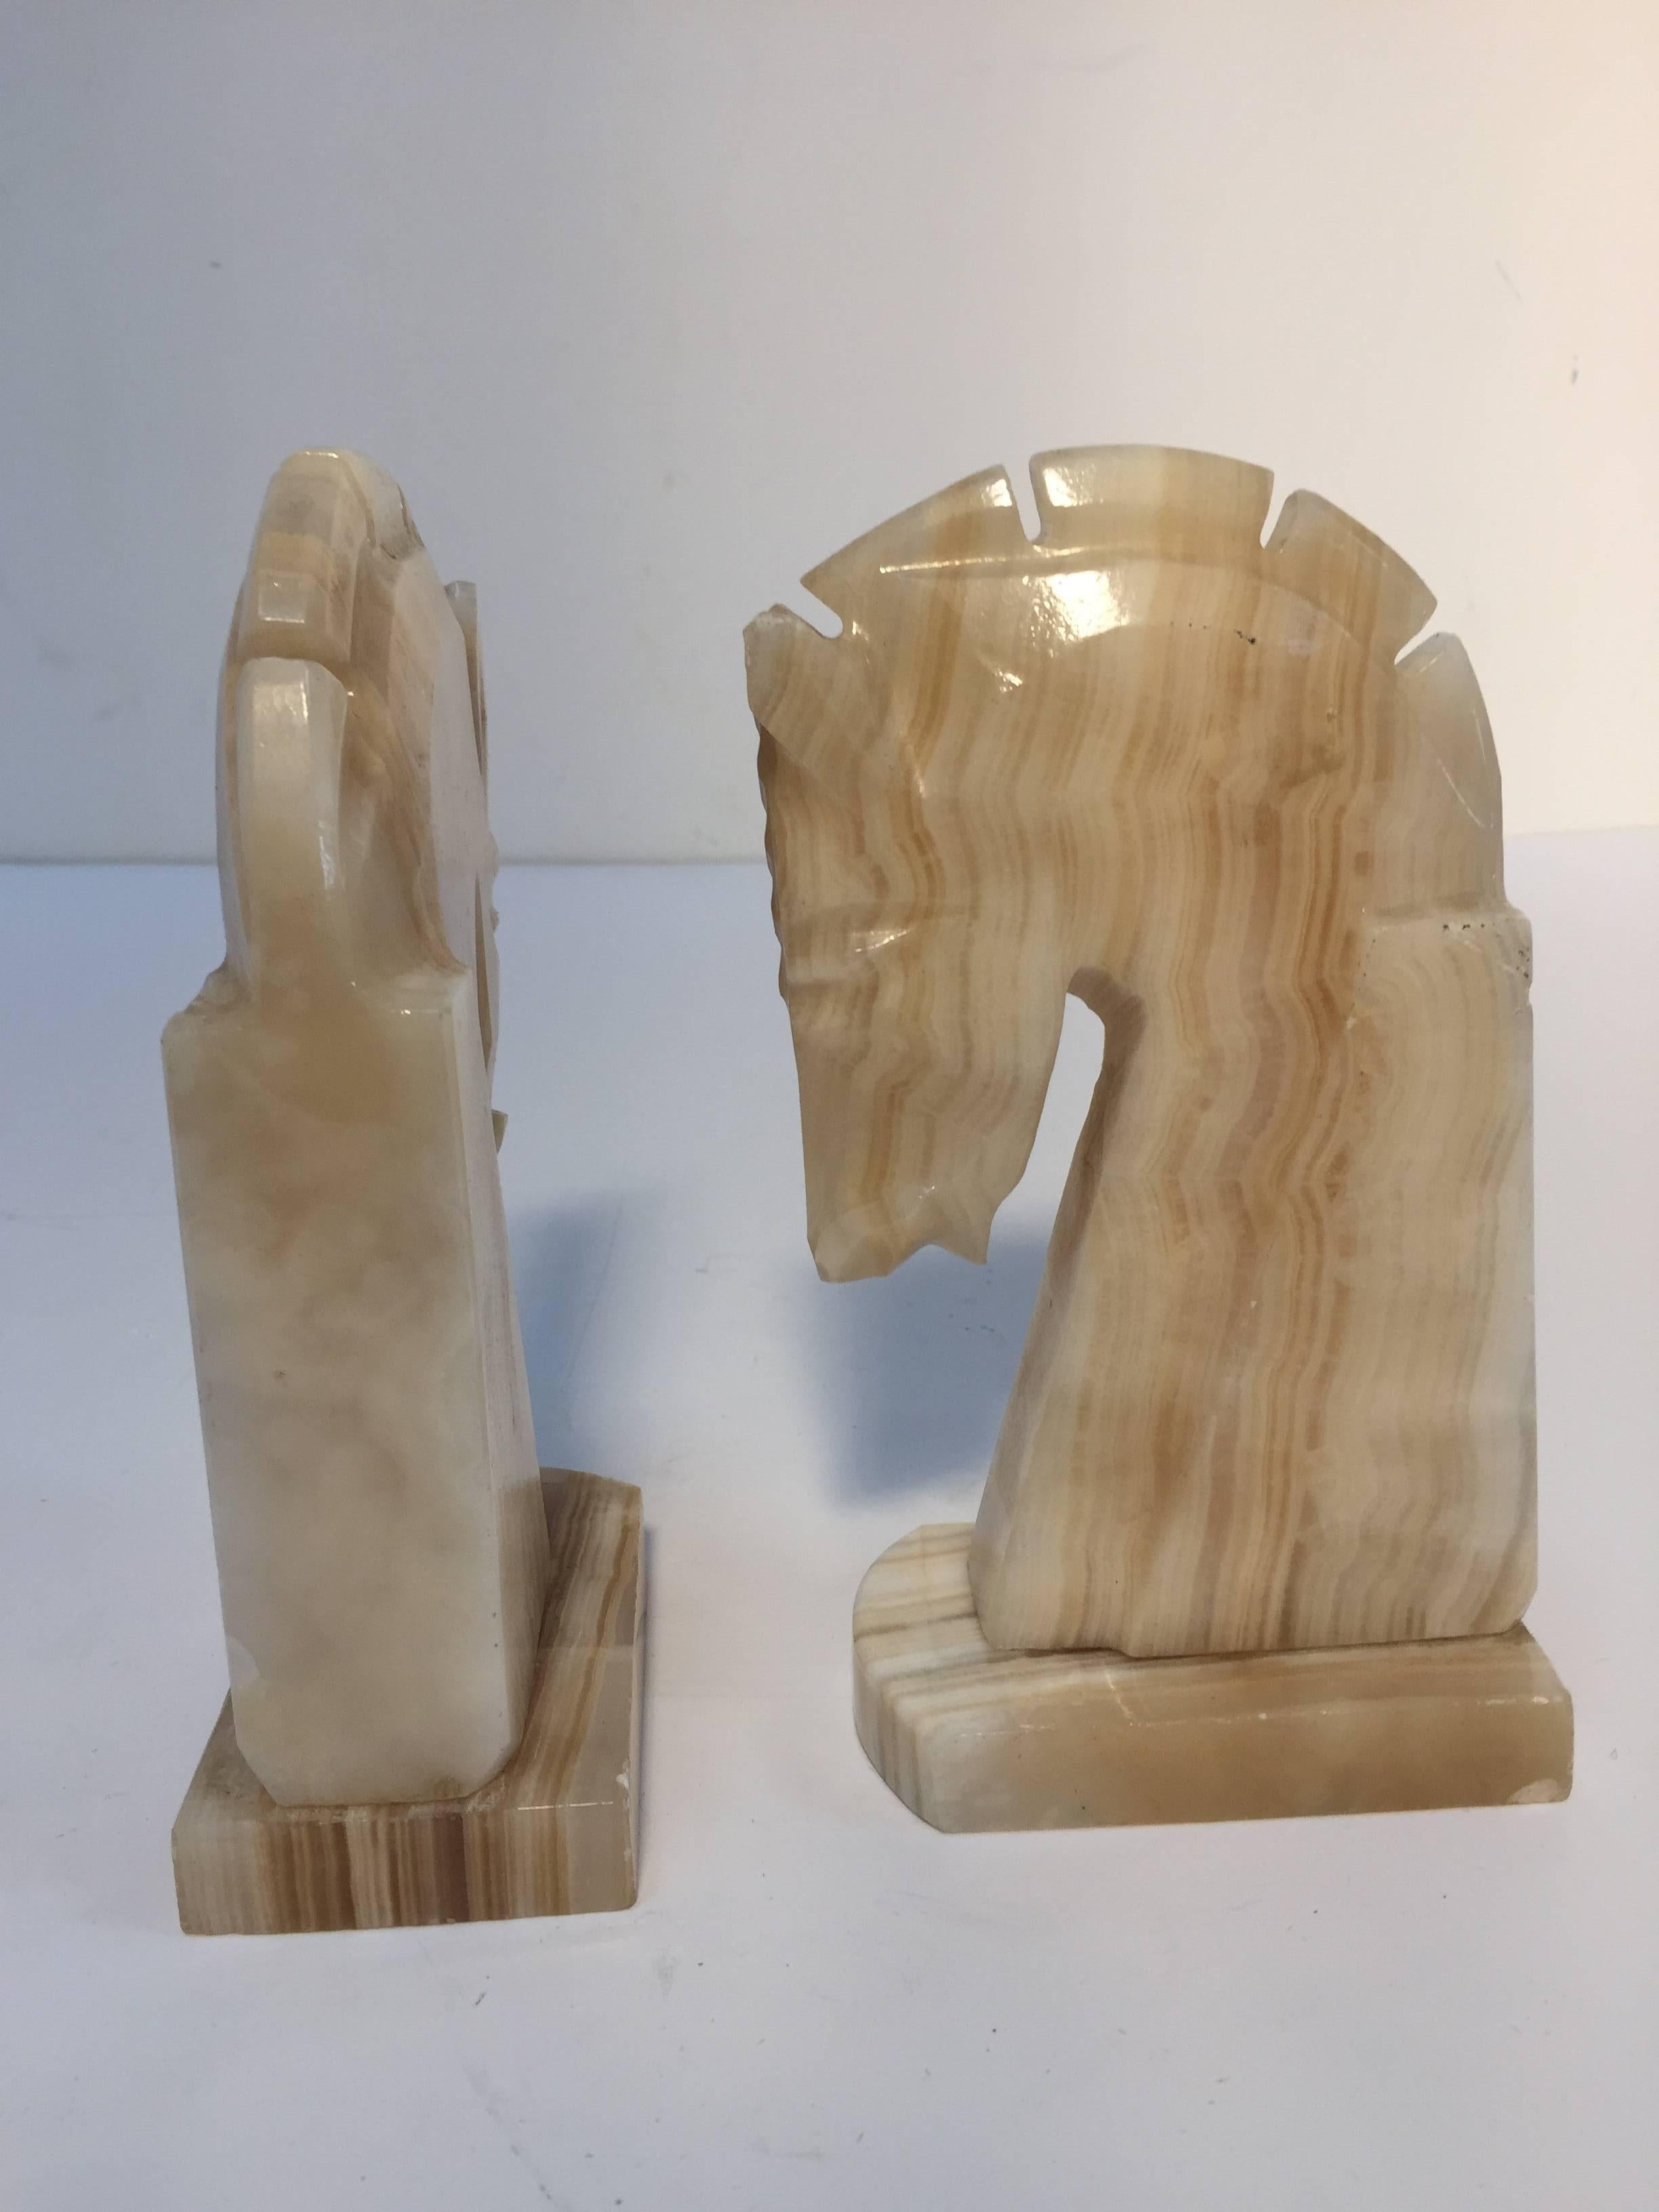 Pair of Art Deco Onyx Horses Heads Bookends 1